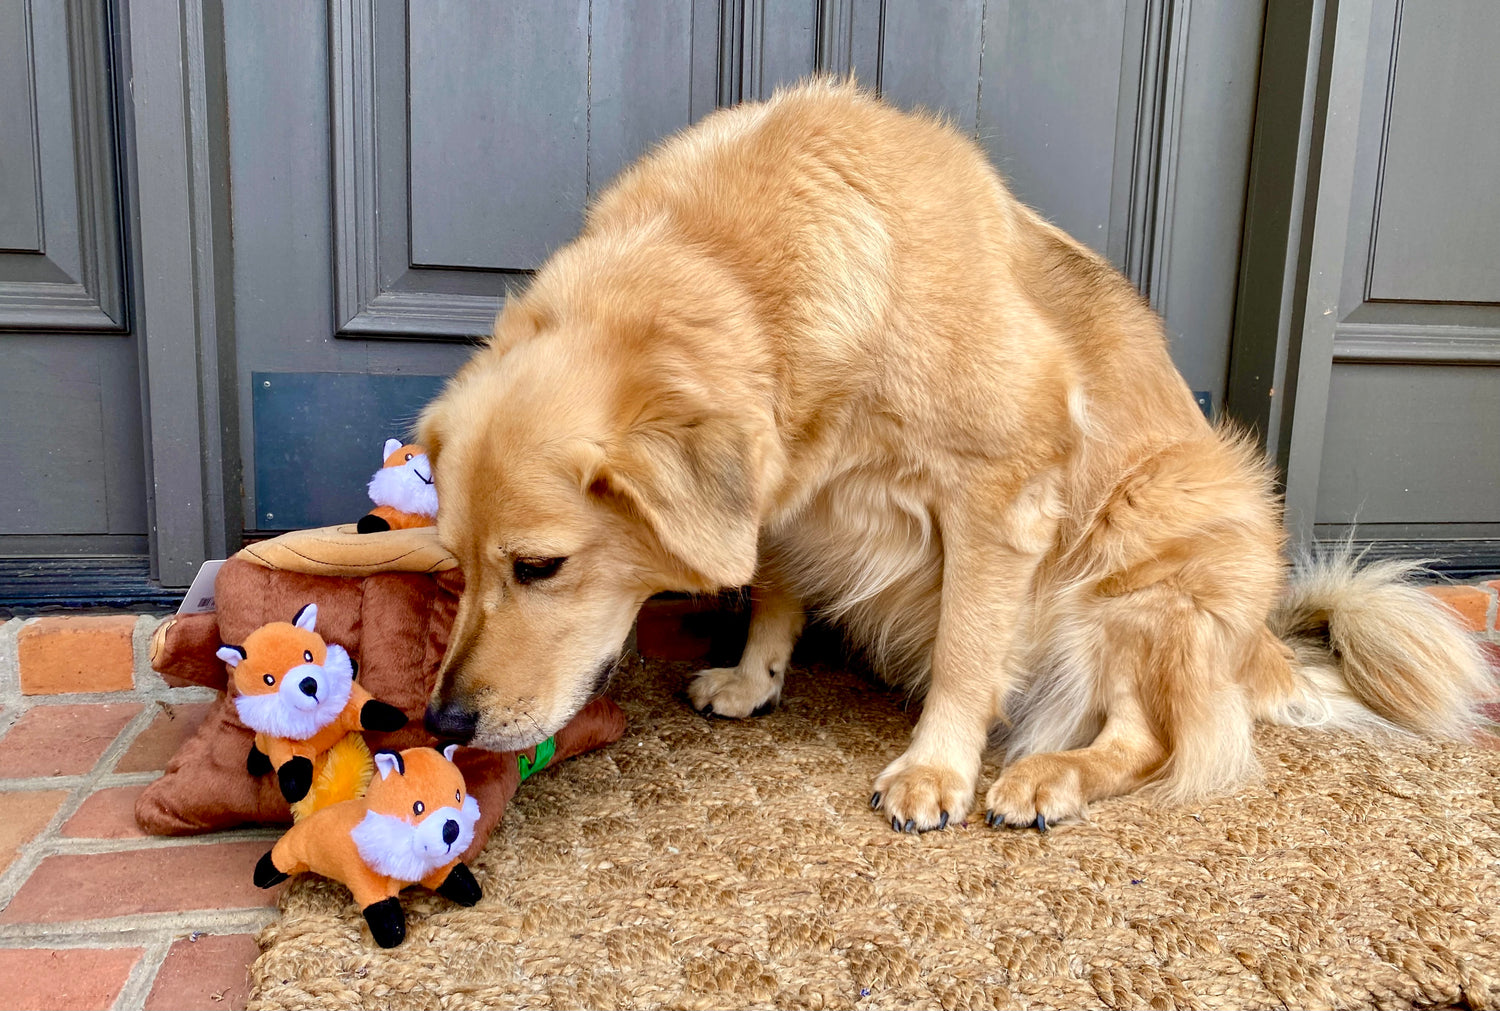 DOG TOYS FOR YOUR FURRY FRIENDS